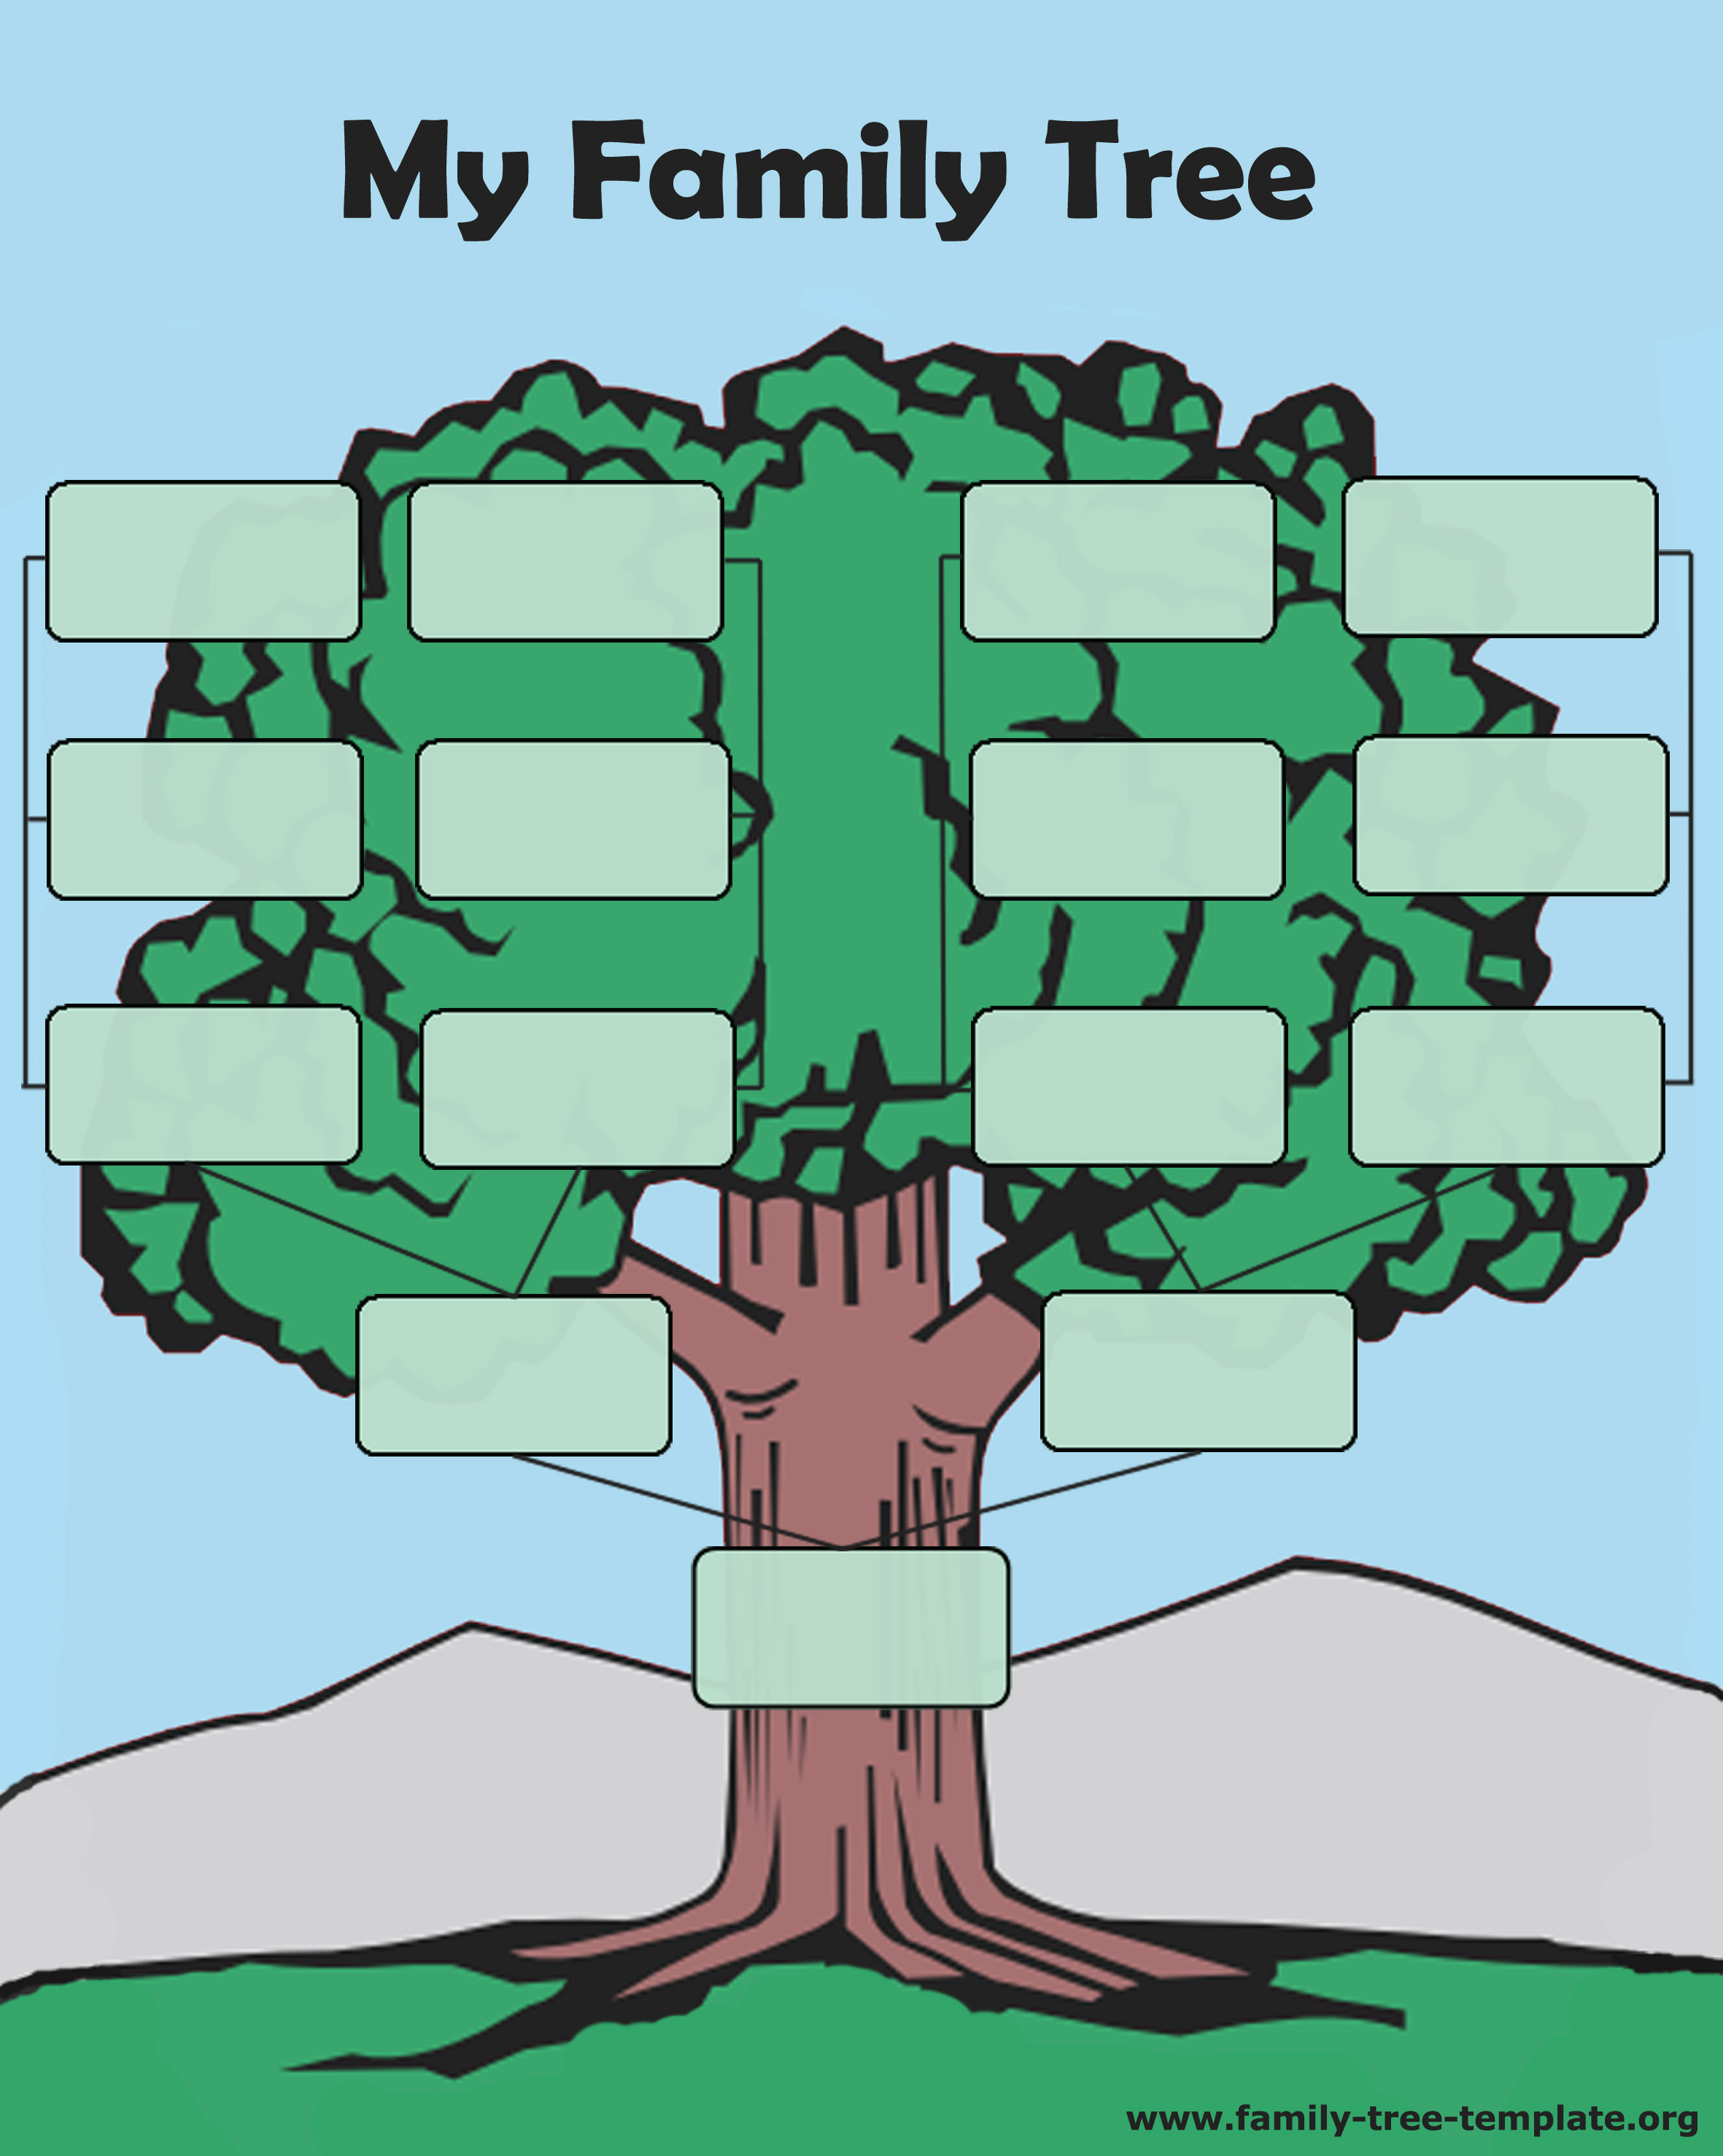 17 Blank Family Tree For Kids   Free Cliparts That You Can Download To    